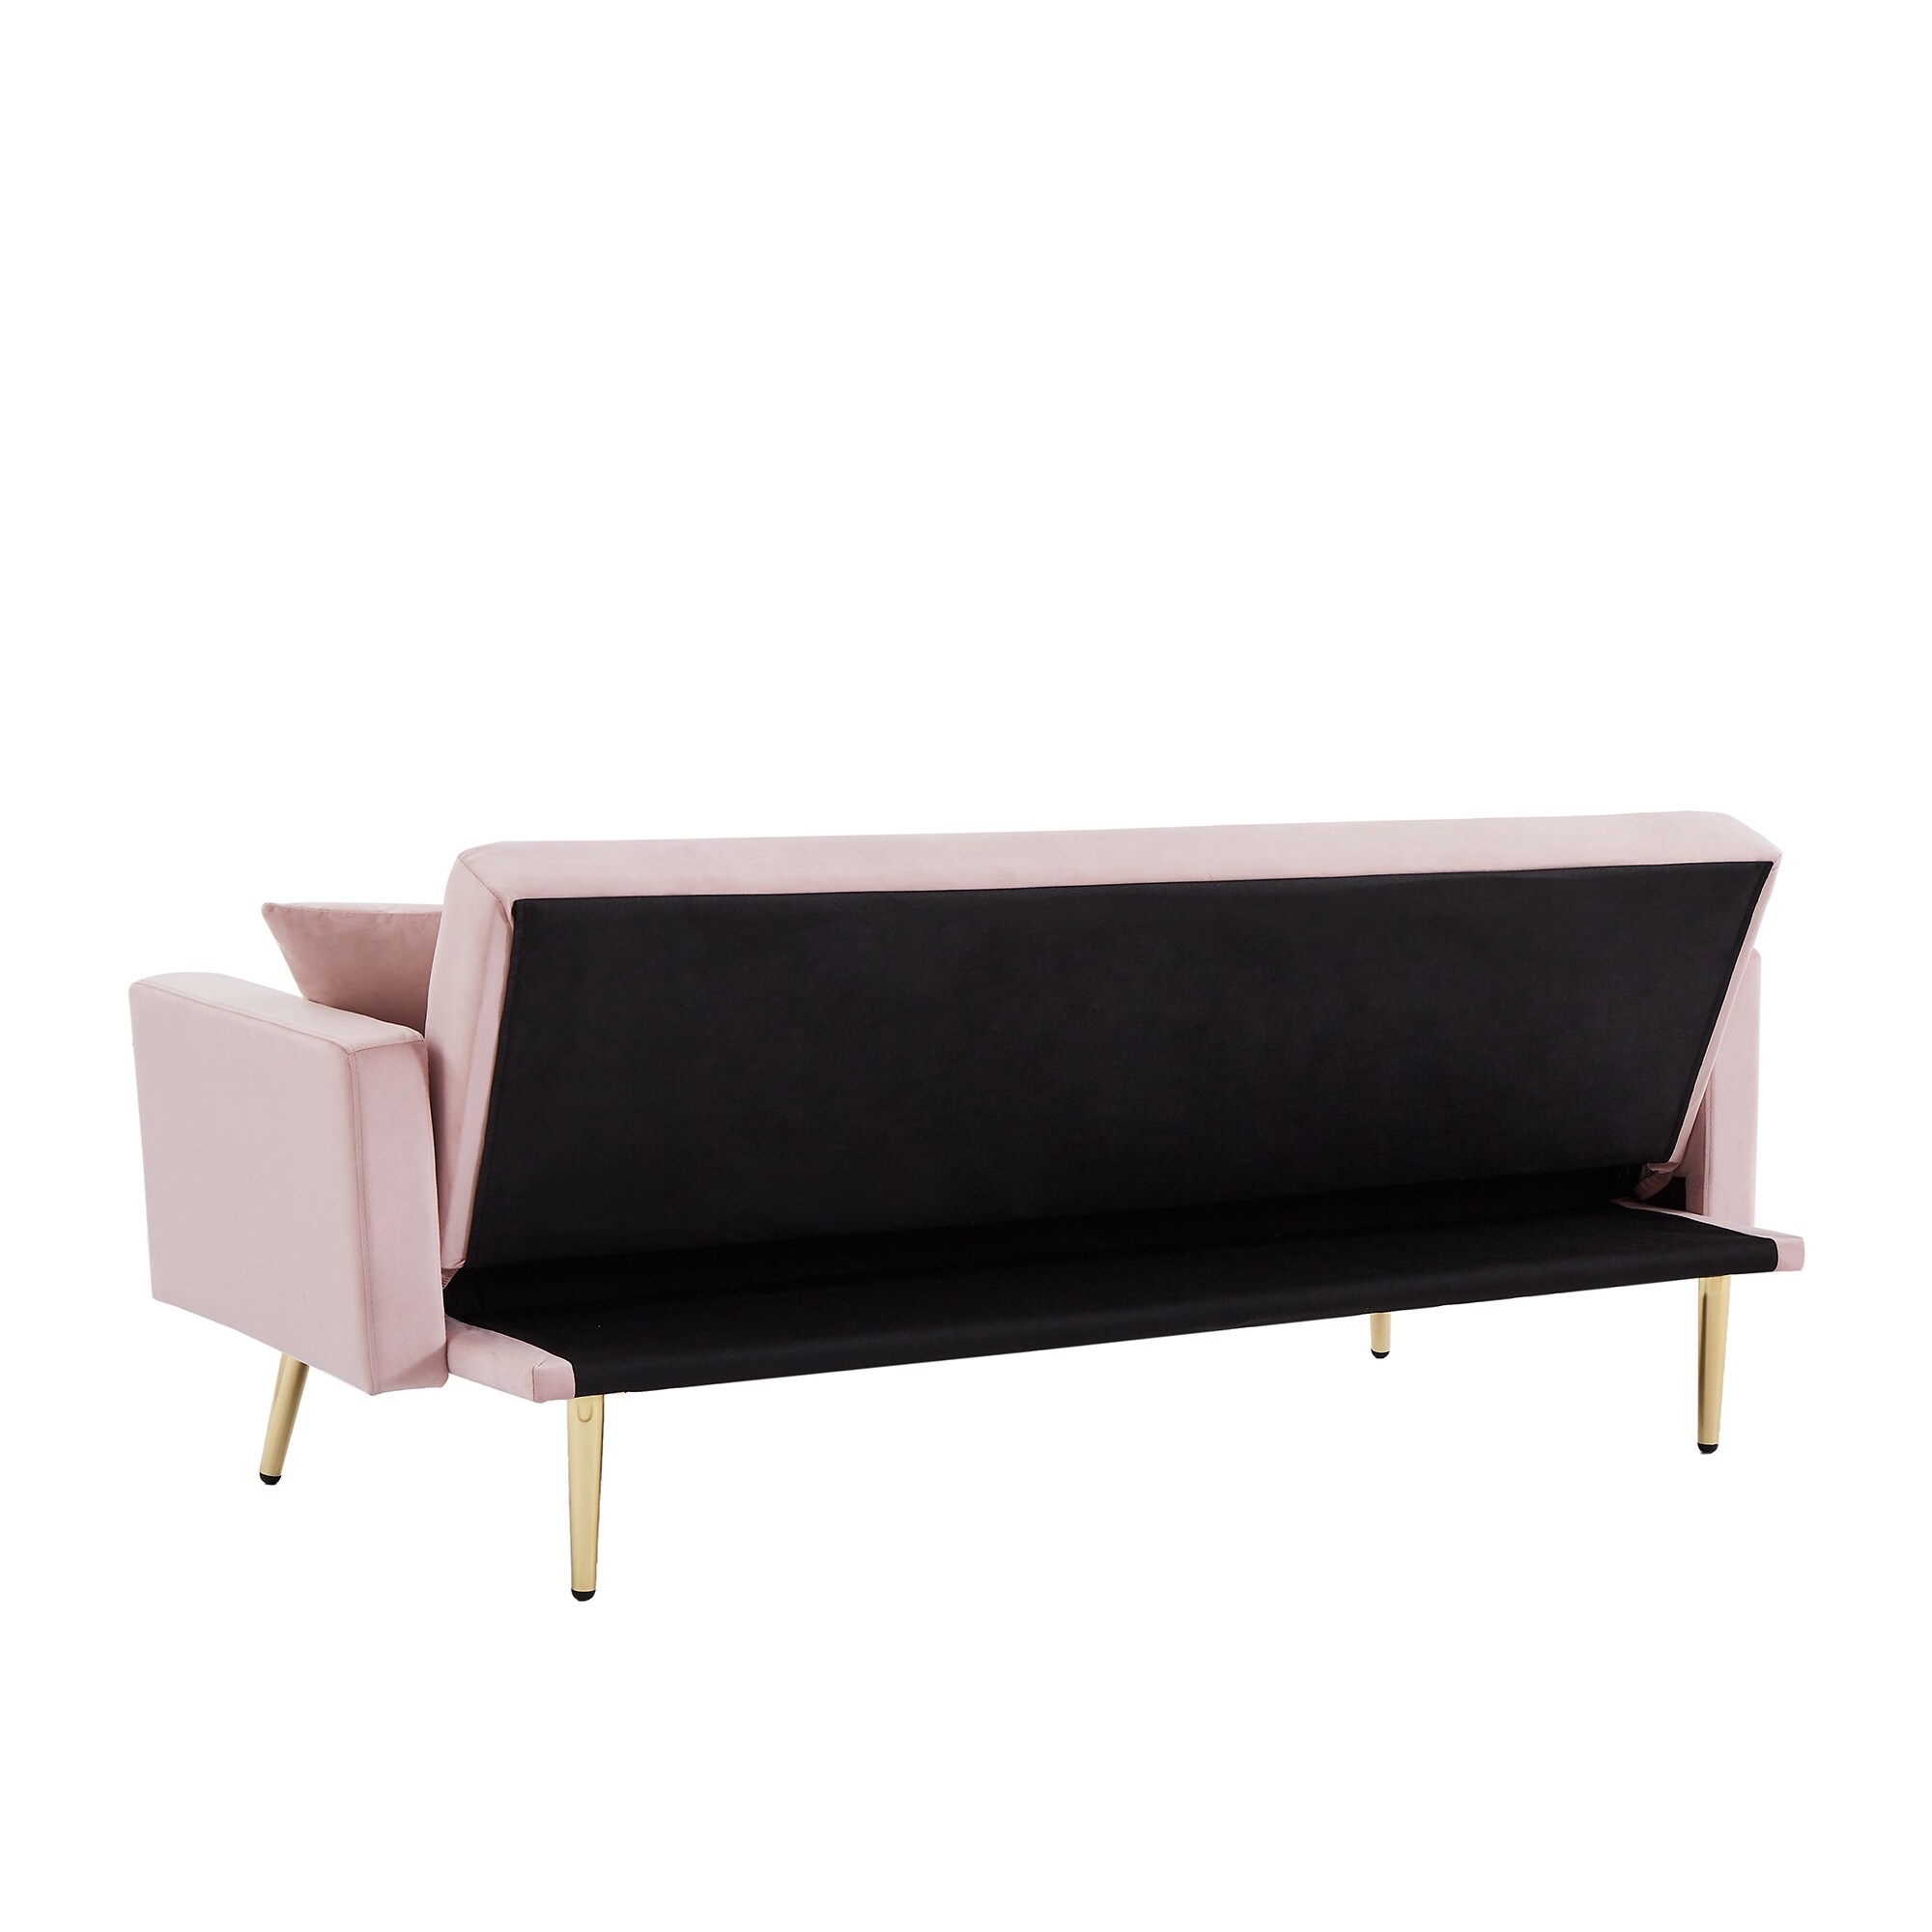 Velvet Sleeper Sofa with Metal Legs for Compact Living Space.